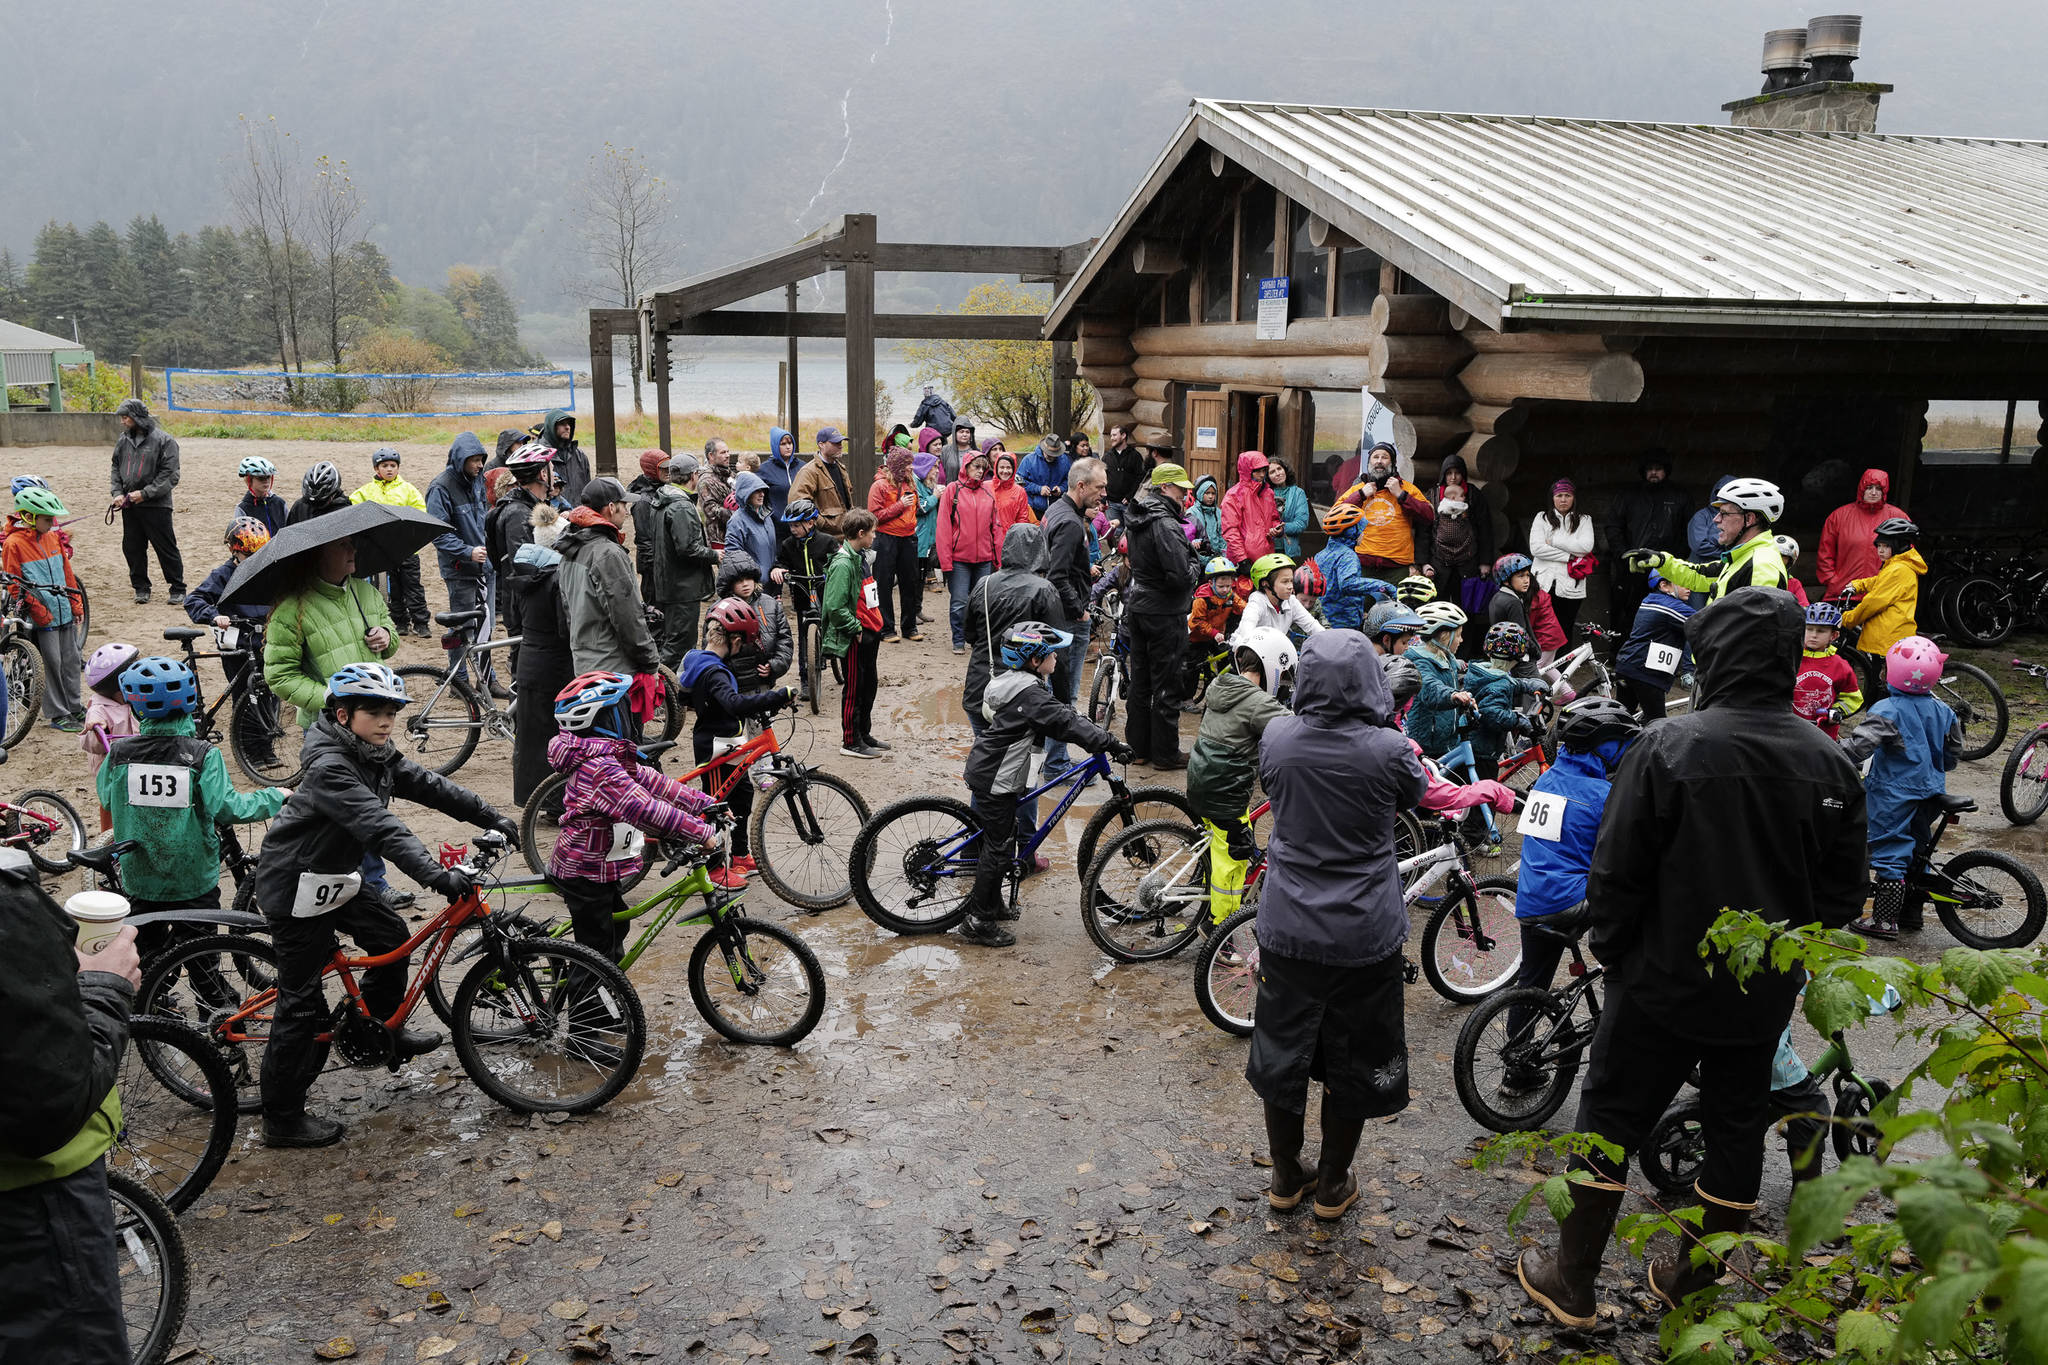 Dave Ringle gives directions before the Douglas Dirt Derby Youth Bike Race at Savikko Park and the Treadwell Historic Trail on Saturday, Oct. 5, 2019. The event was organized by the Juneau Freewheelers Bicycle Club. (Michael Penn | Juneau Empire)